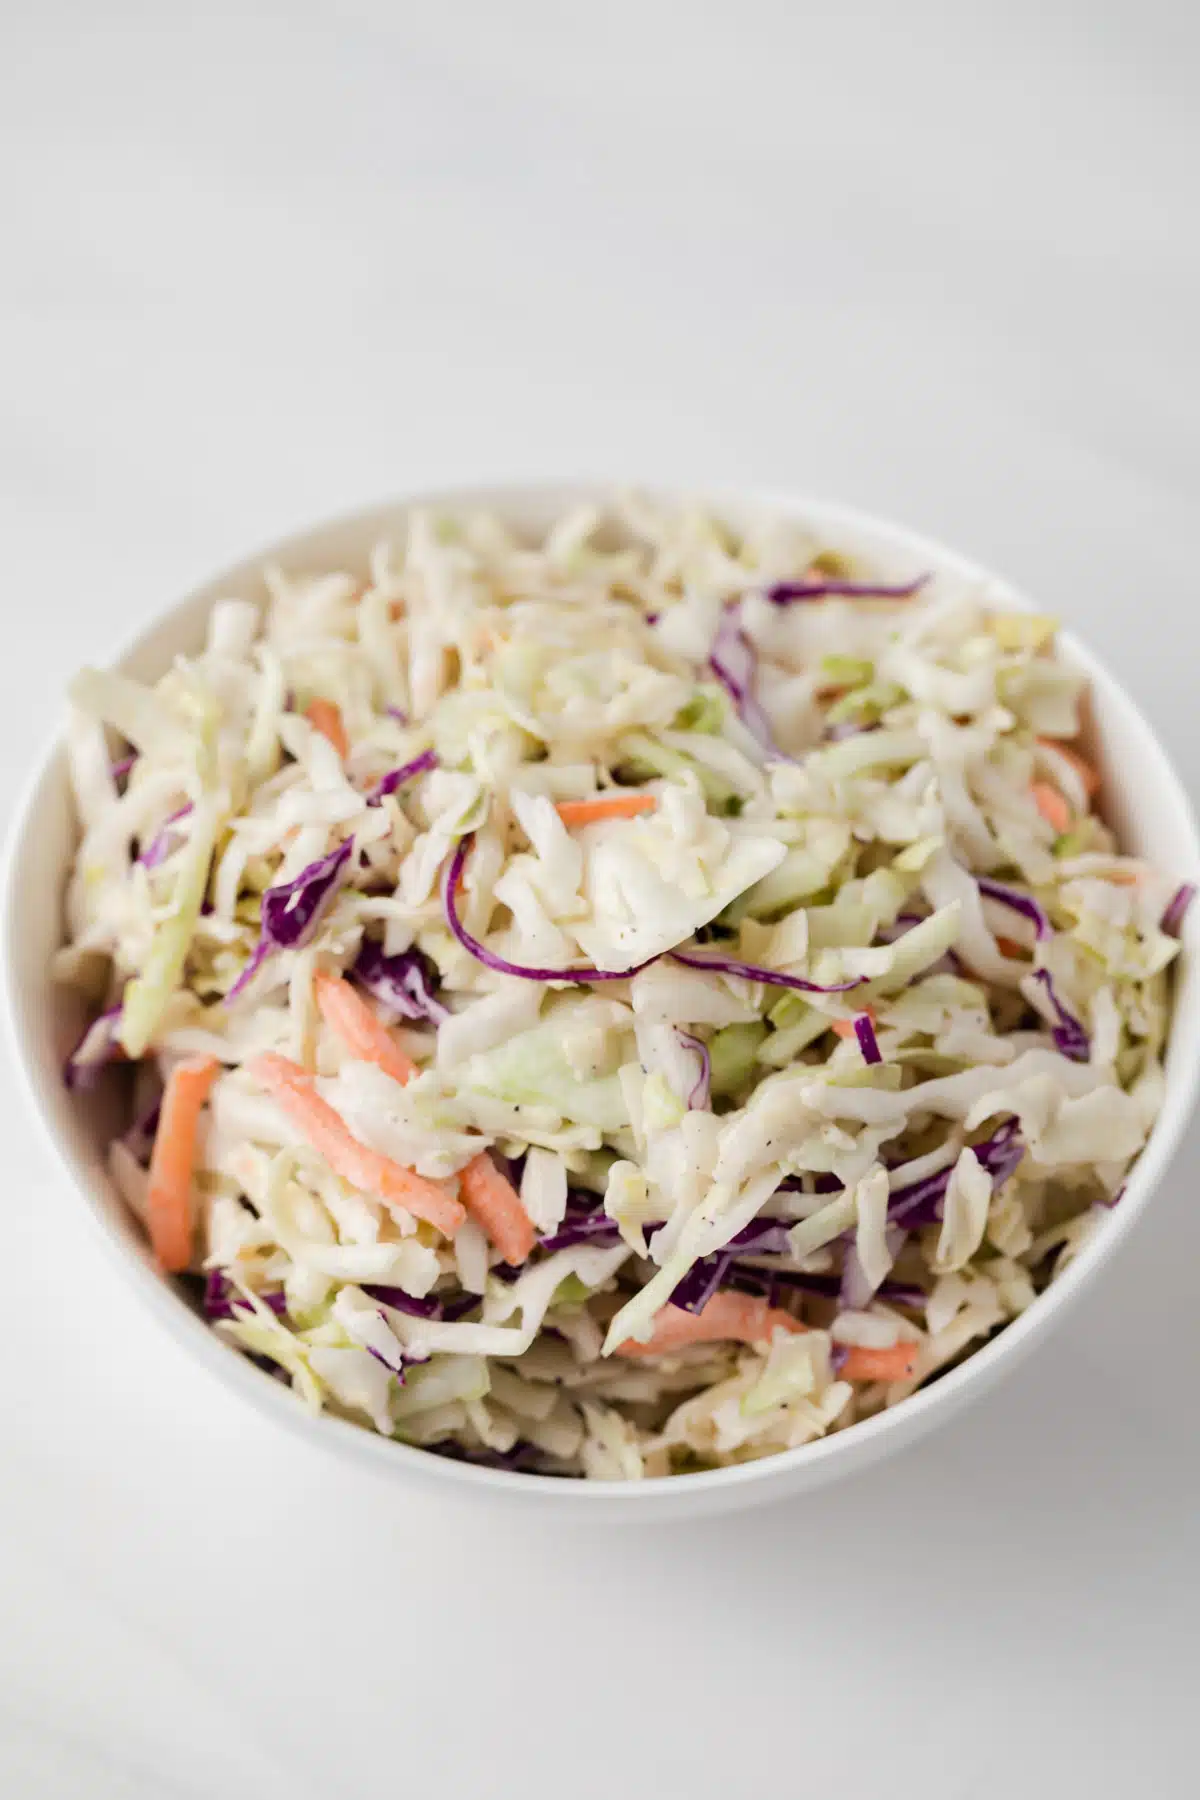 High angled view of slaw coated in coleslaw dressing.